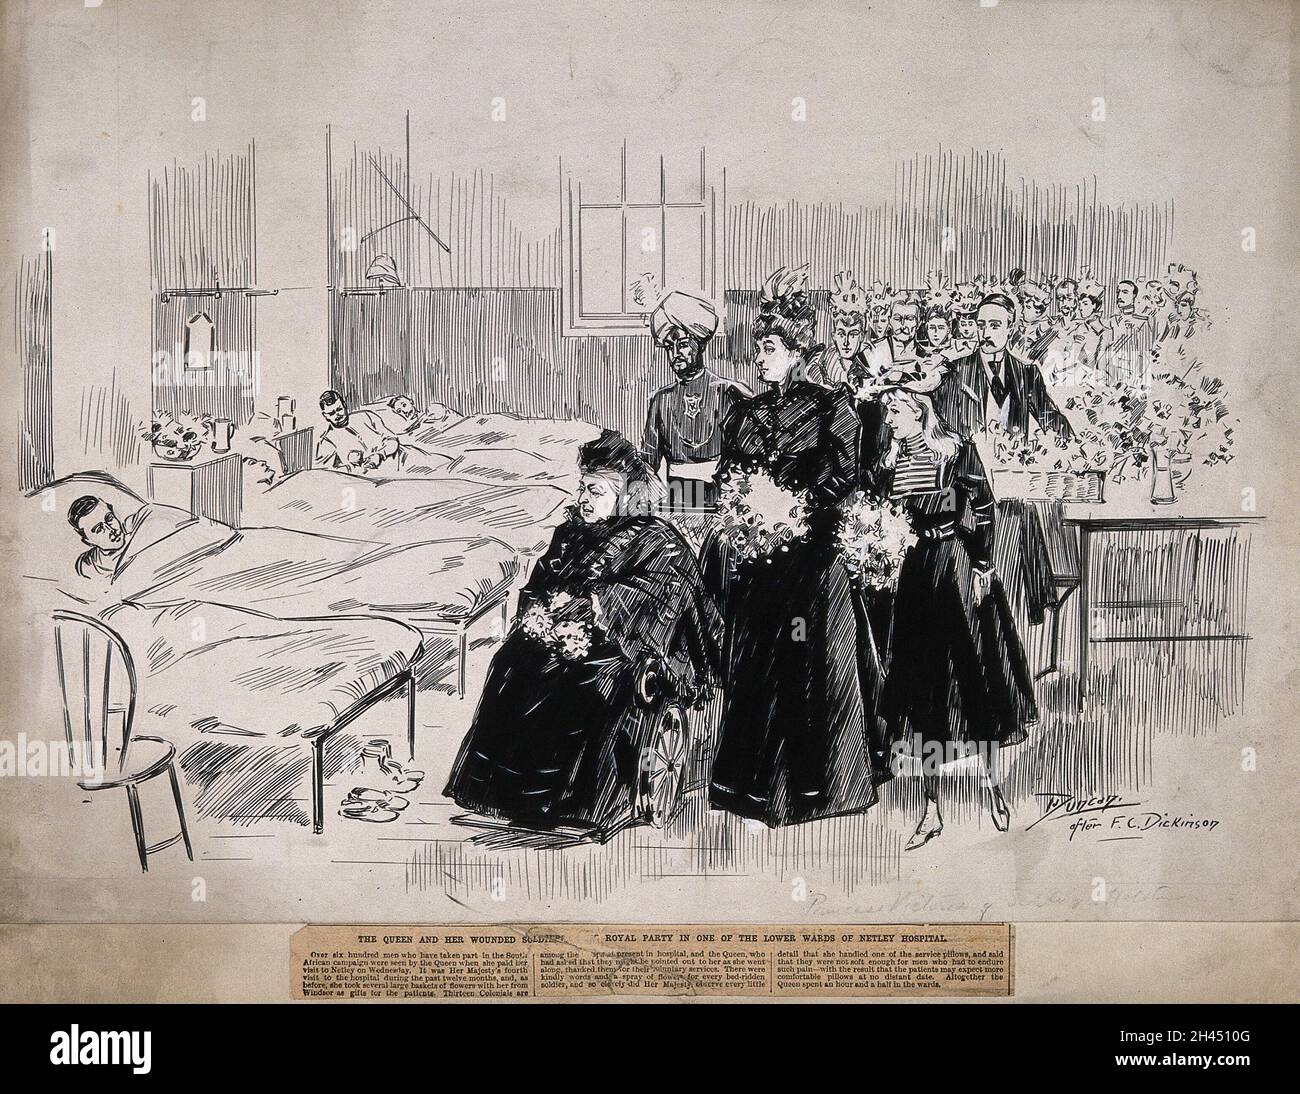 Her Majesty Queen Victoria and entourage visiting soldiers wounded during the Boer War, in a ward at Netley Hospital. Pen and ink drawing by J. Duncan, c. 1900, after F. C. Dickinson. Stock Photo